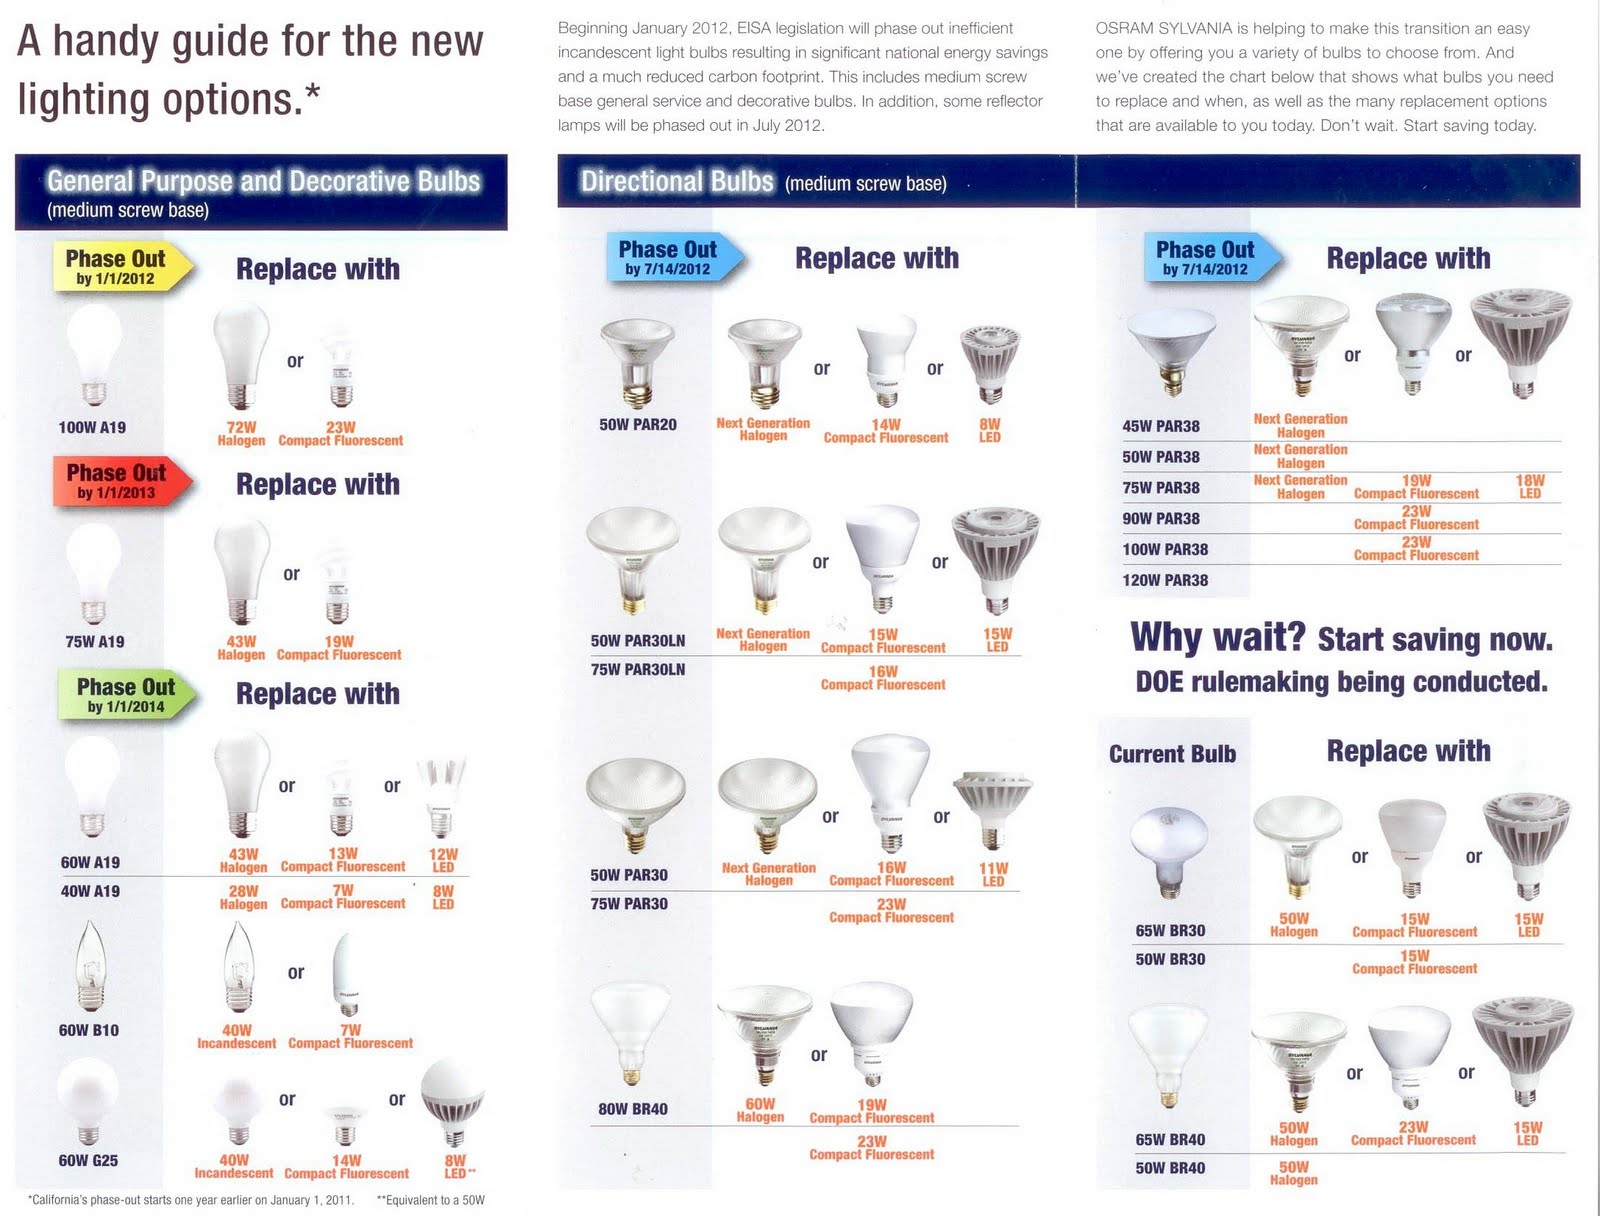 Dominion Electric Lighting Blog: Sylvania's handy guide for the new